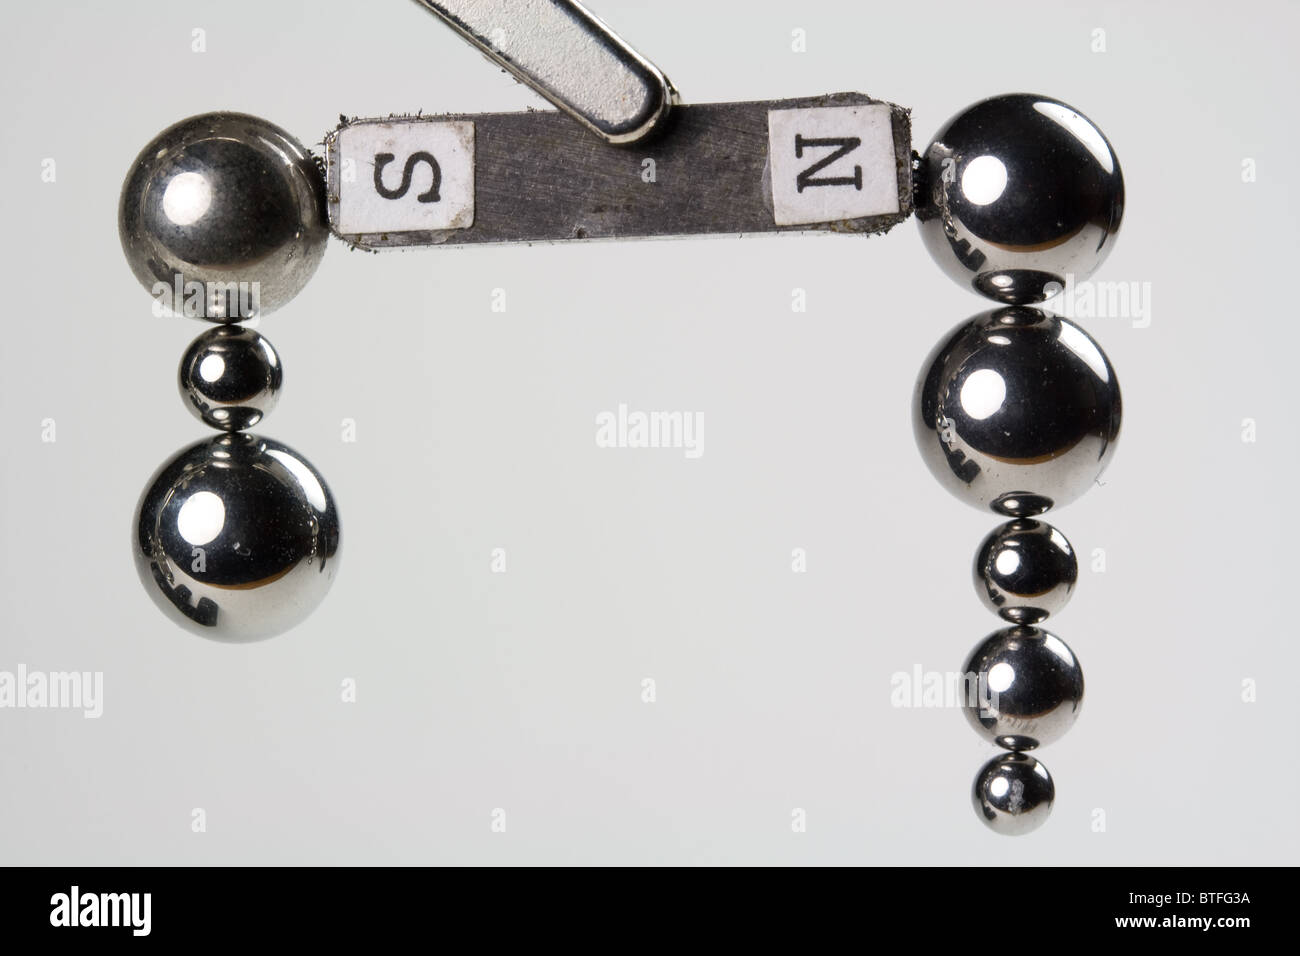 Steel Ball Bearings Attracted to Magnet Stock Photo